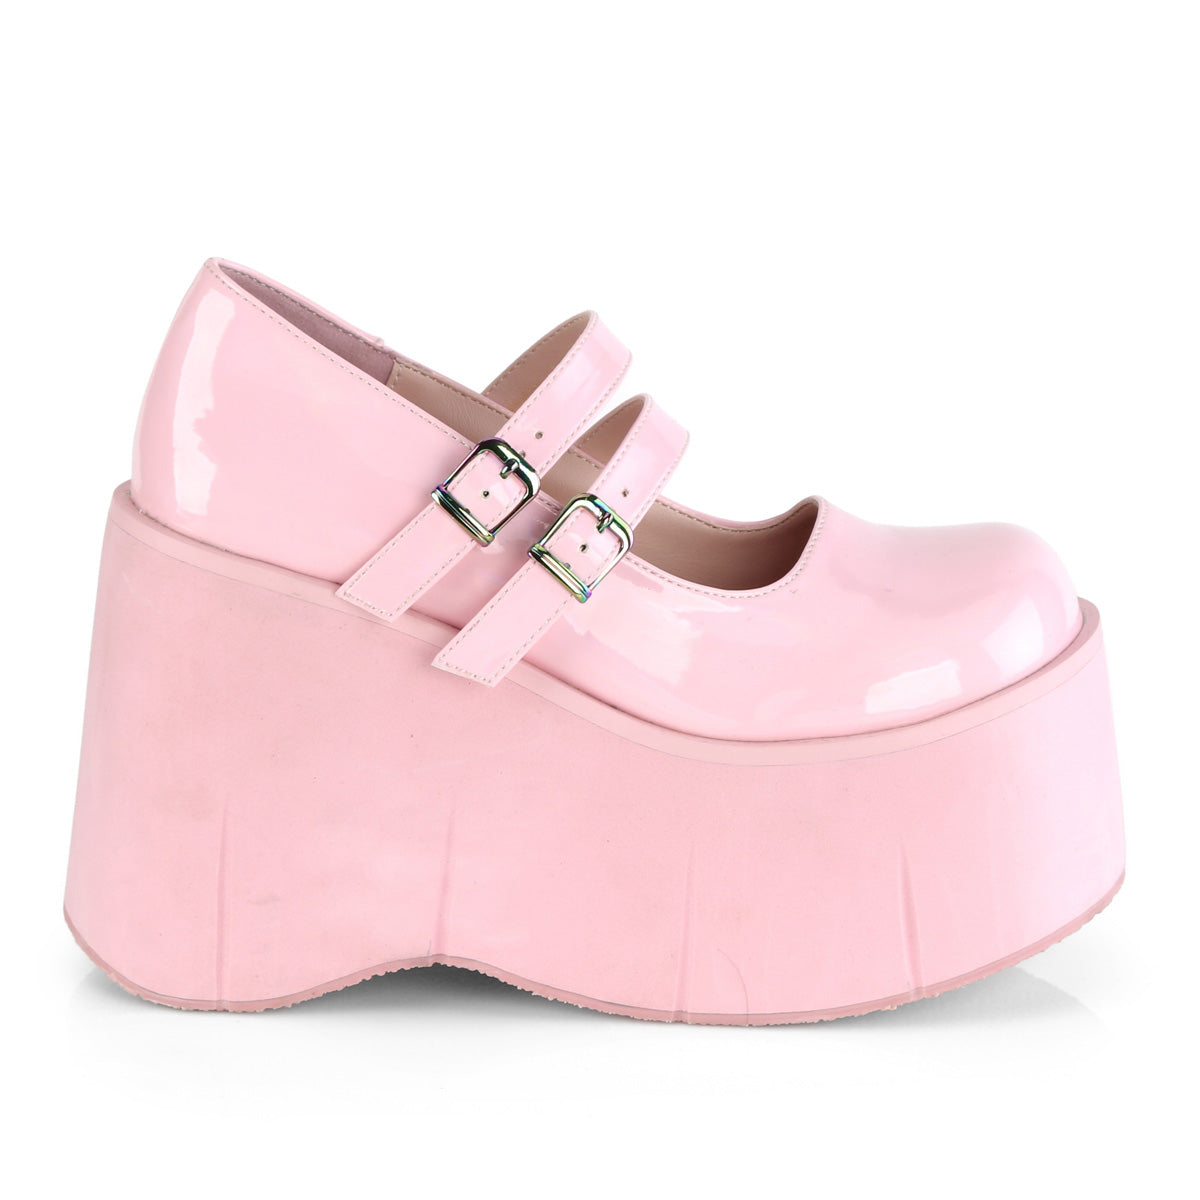 Mary Jane Style Baby Pink Platform Shoes